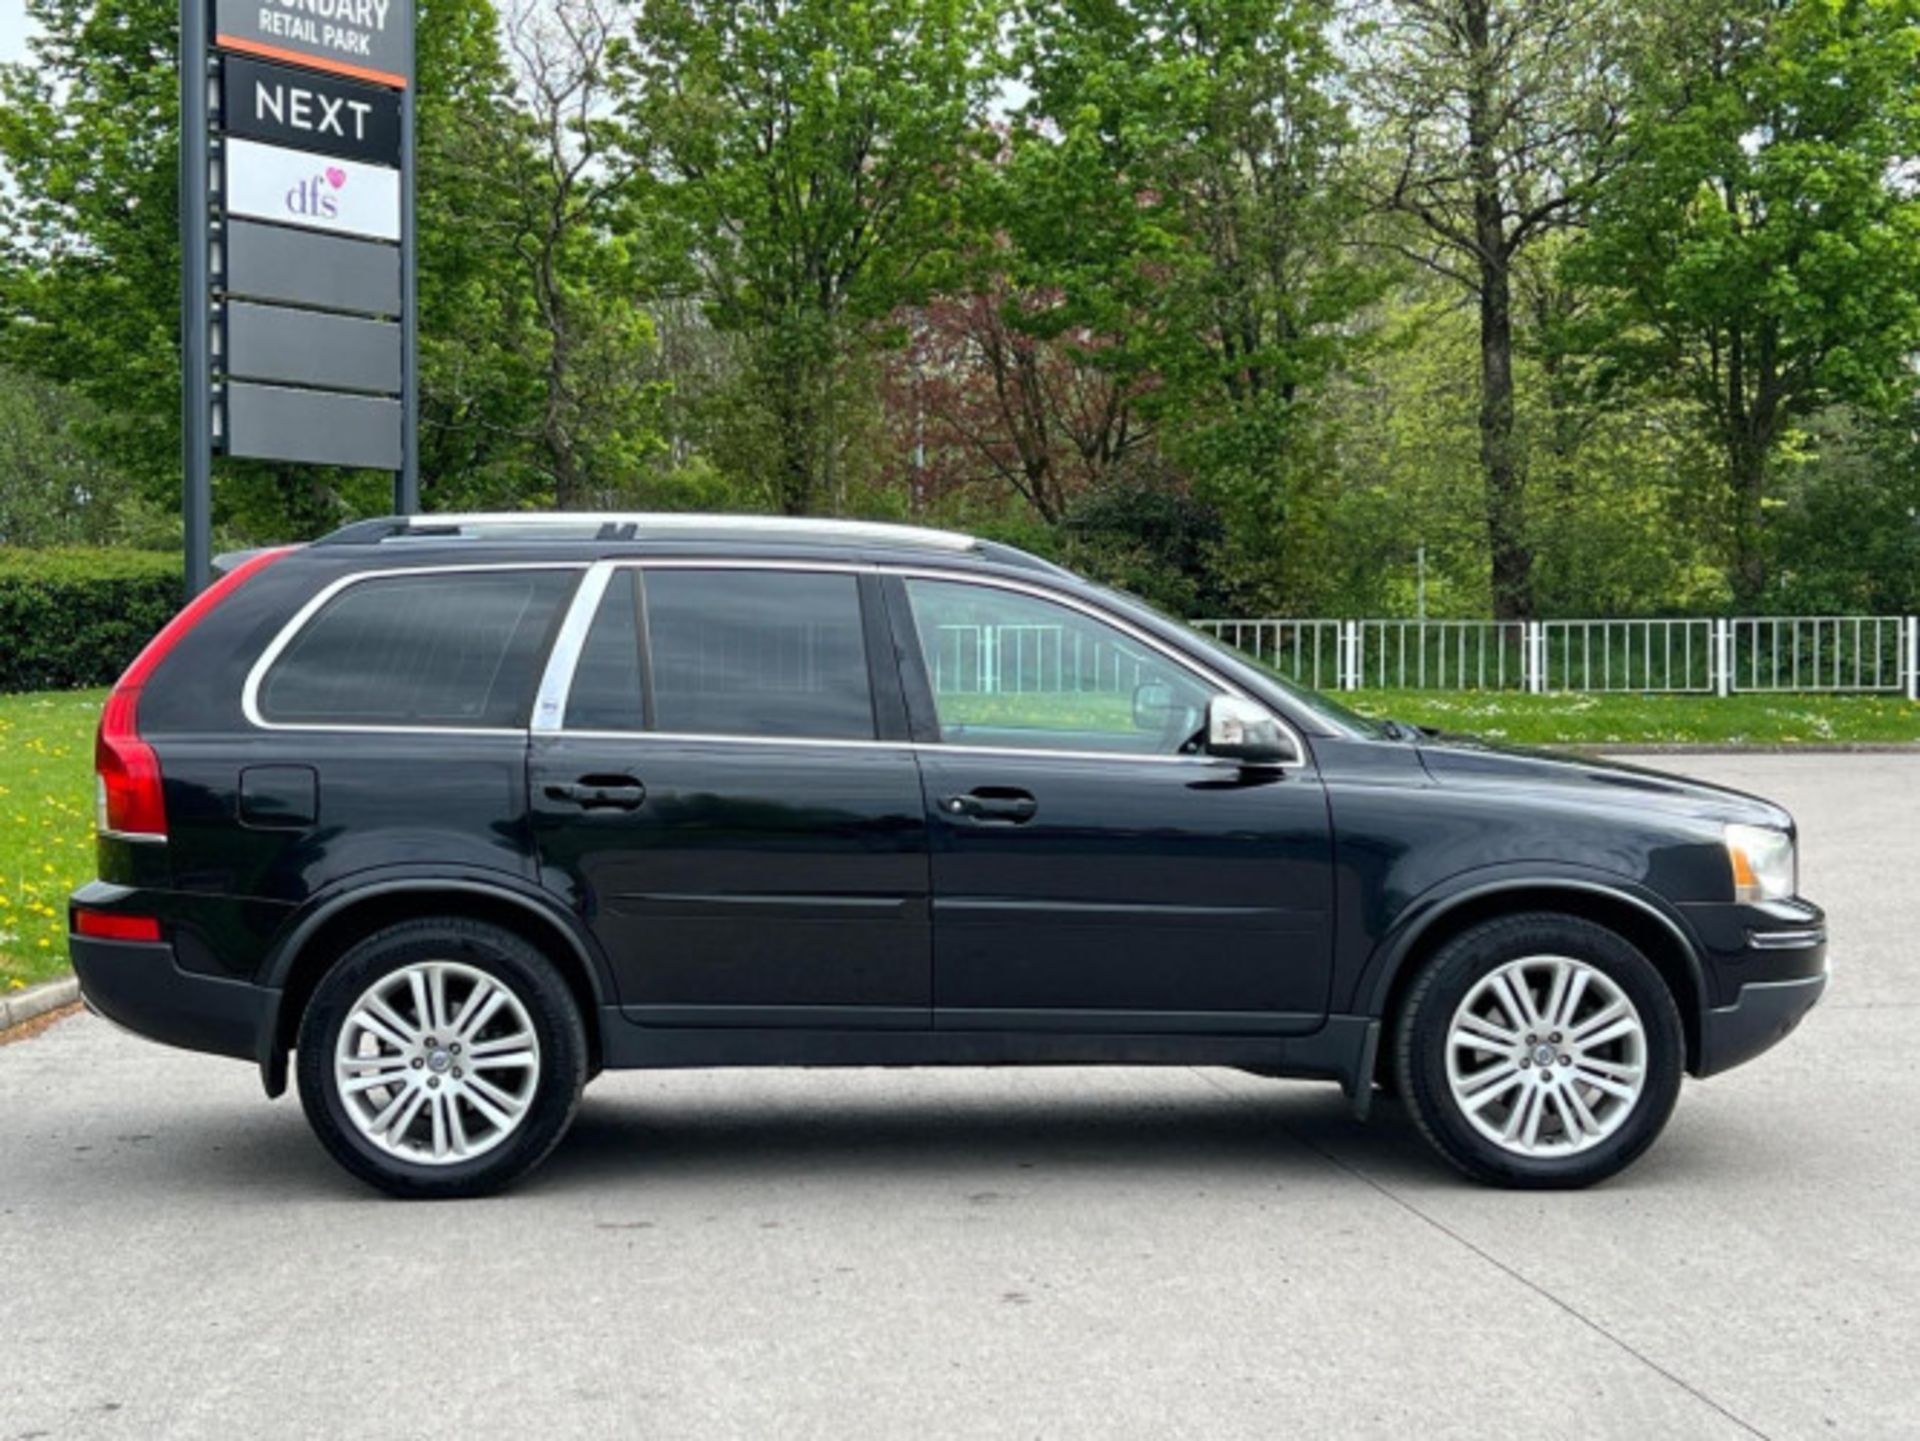 VOLVO XC90 2.4 D5 EXECUTIVE GEARTRONIC AWD, 5DR >>--NO VAT ON HAMMER--<< - Image 6 of 136